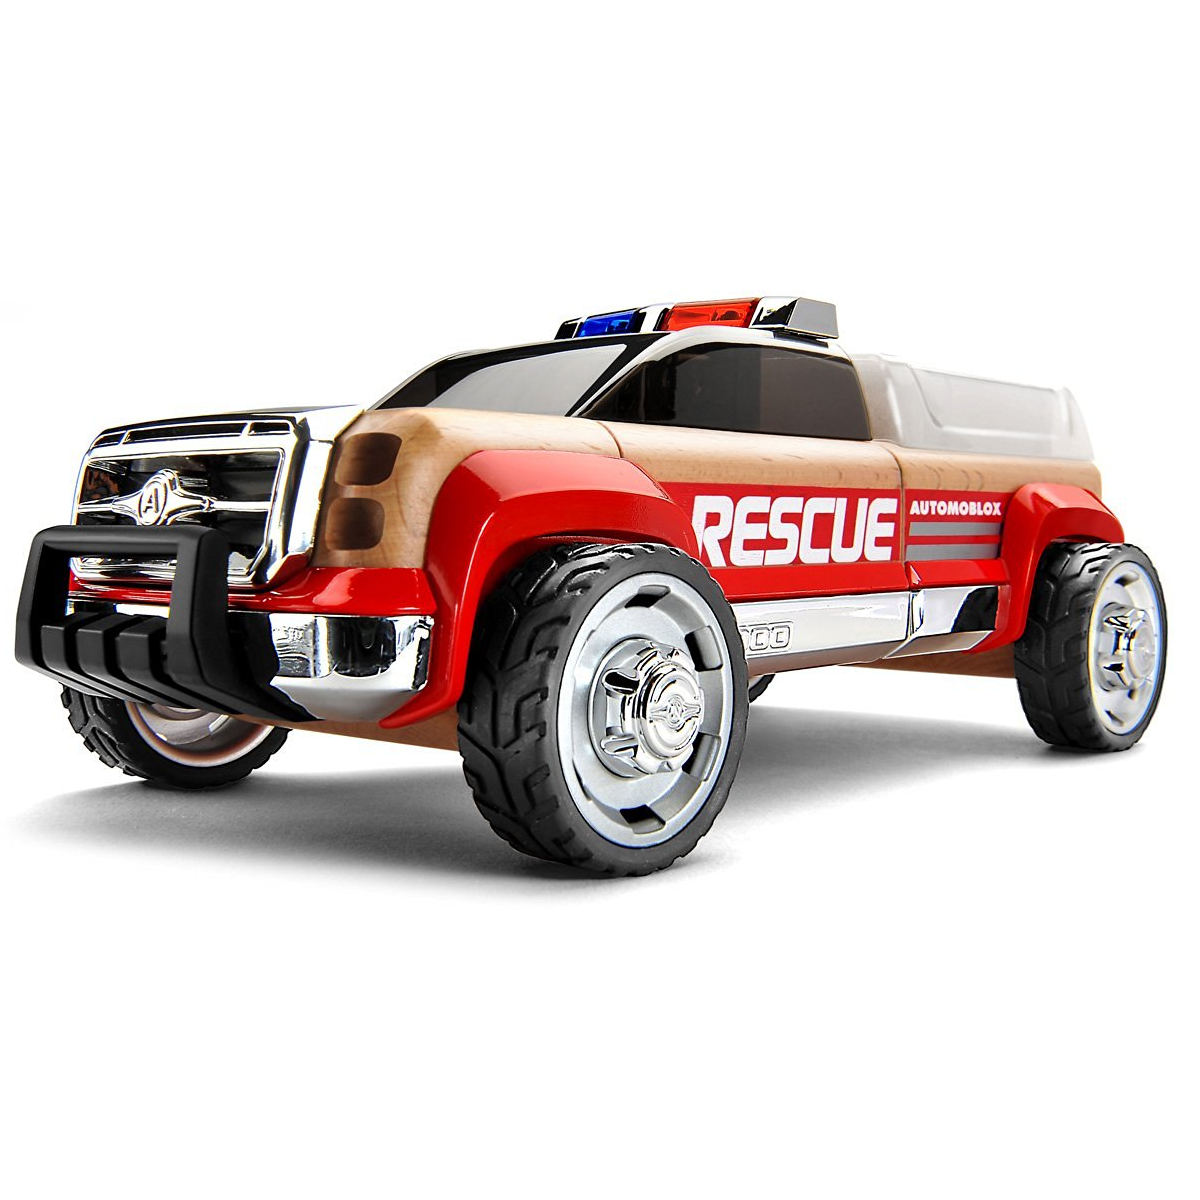 Automoblox T900 Rescue Truck Only $28.99! (Reg $49.99)